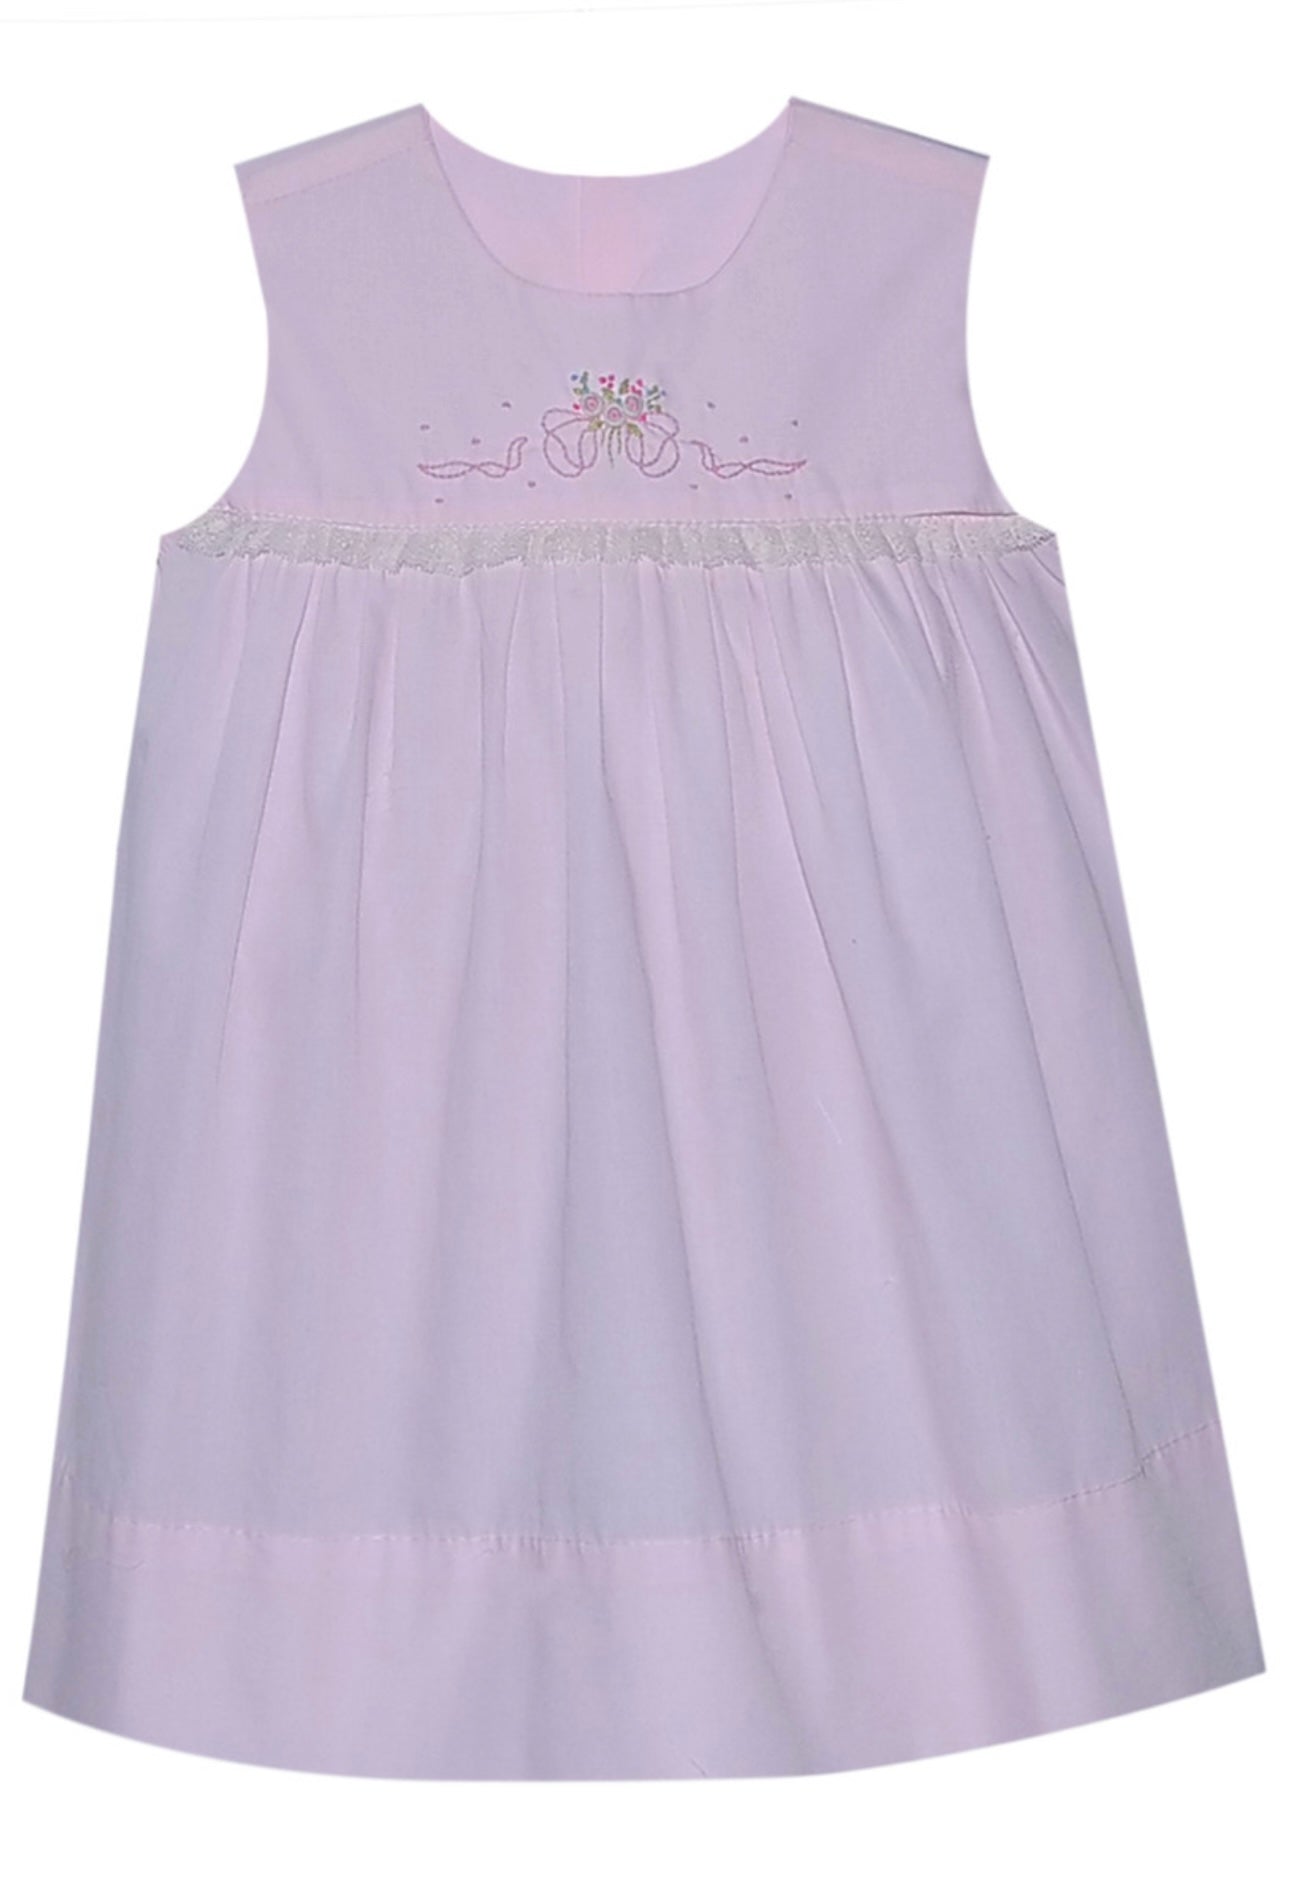 Reagan Dress Dainty Flowers with Bow